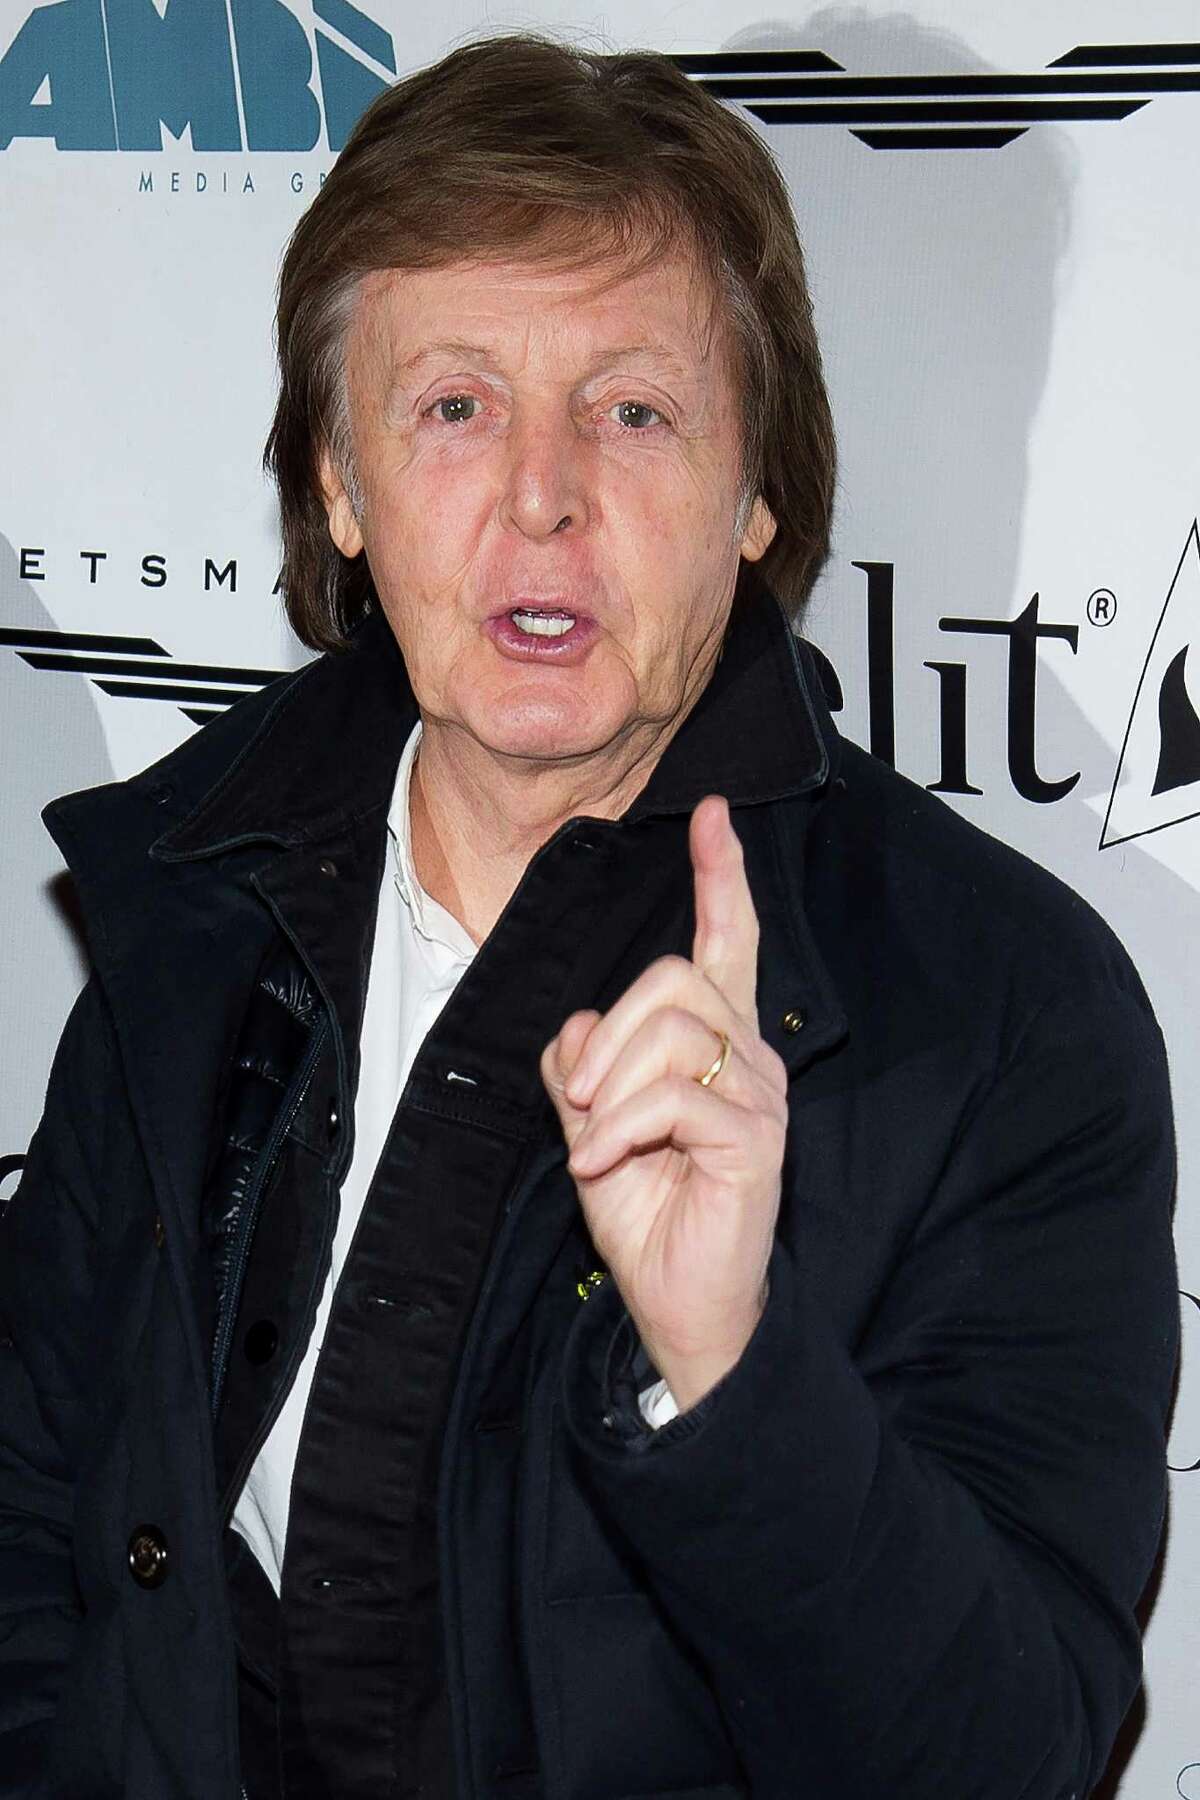 FILE- This Dec. 19, 2016 file photo shows Paul McCartney as he arrives for a screening of "This Beautiful Fantastic" at the SVA Theatre in New York. McCartney filed a lawsuit in federal court in New York on Wednesday, Jan. 18, 2017 against Sony/ATV over copyright ownership of the many hit songs he wrote with John Lennon as part of The Beatles. He's trying to recover ownership of the music that was purchased by Michael Jackson in 1985 and then fully sold over to Sony/ATV following his death. (Photo by Charles Sykes/Invision/AP, File)